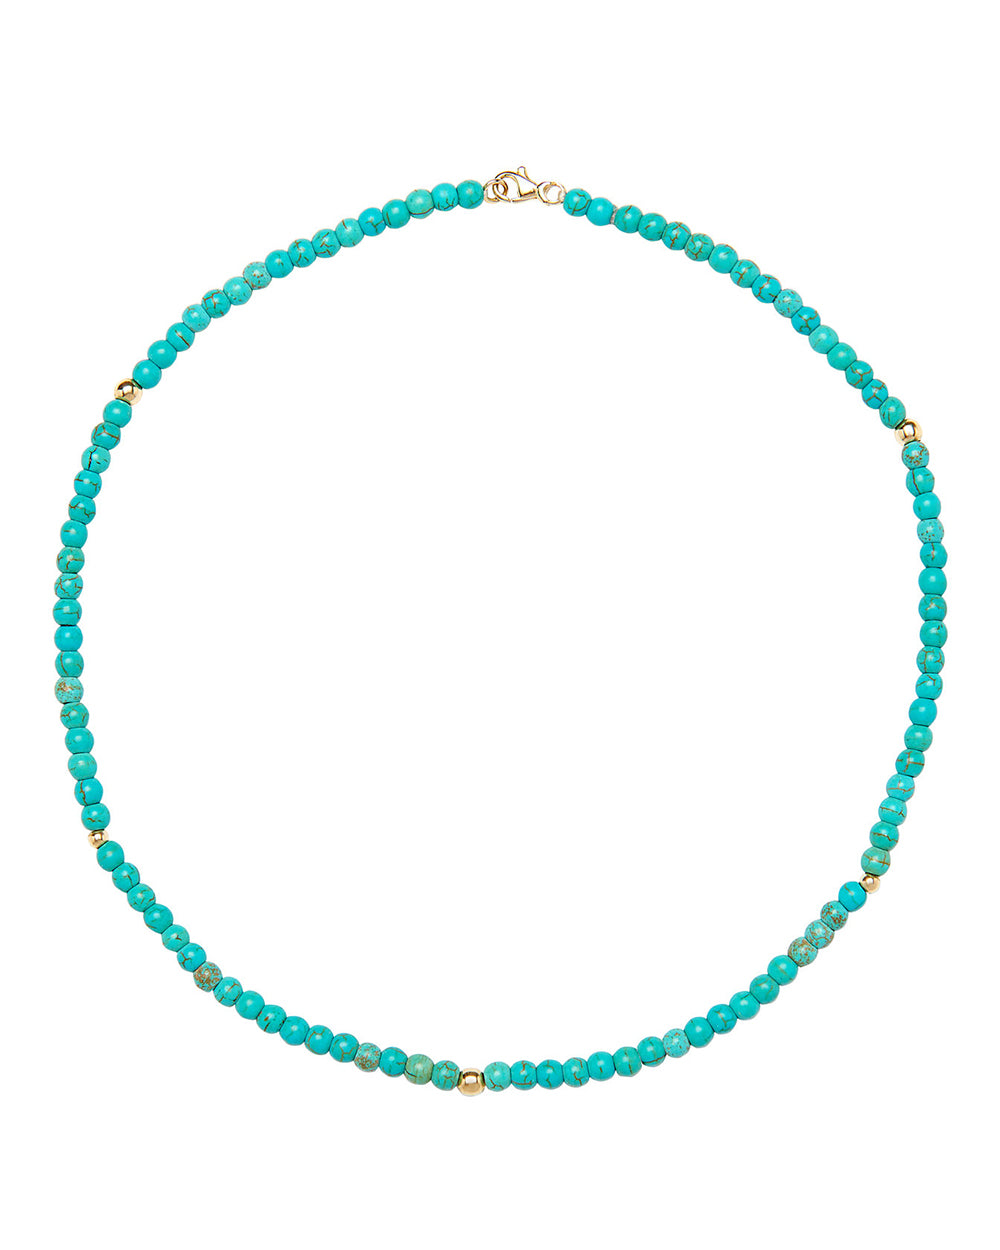 OC02 Turquoise necklace with five gold balls